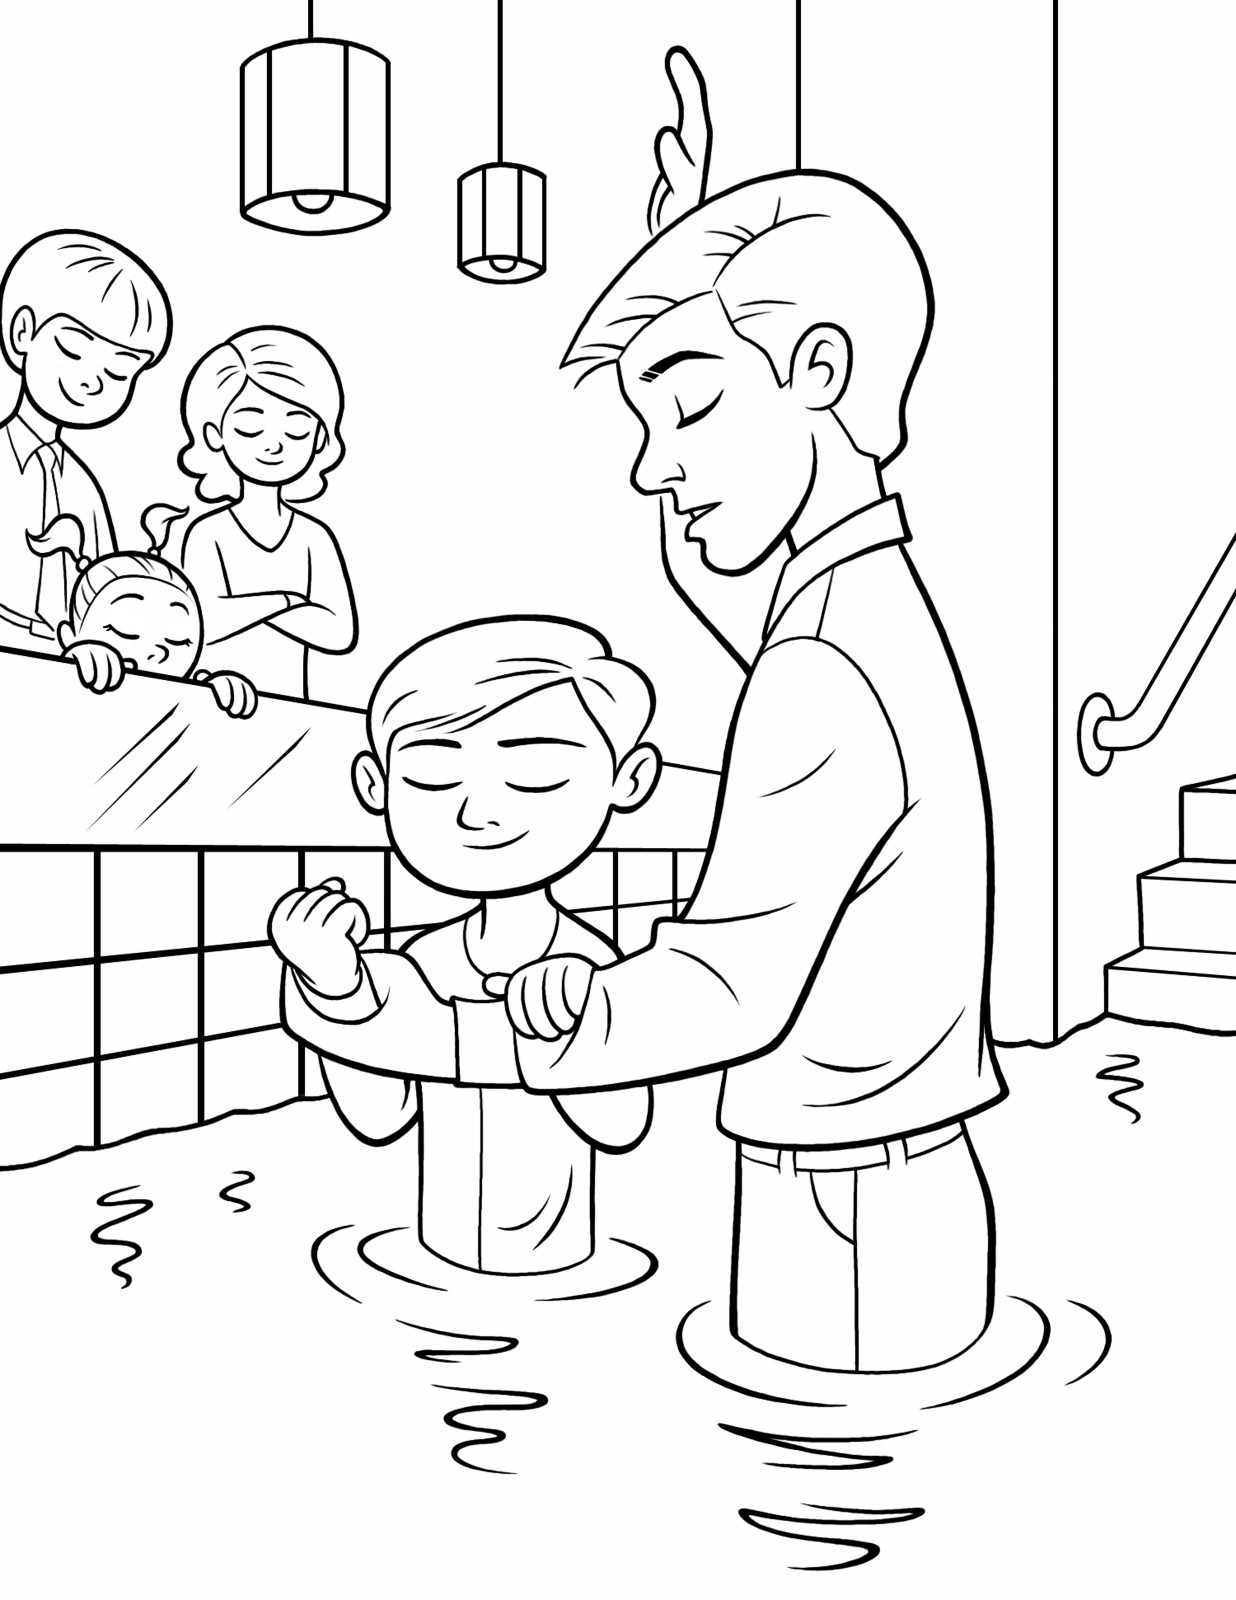 Lds Printable Coloring Pages Boys Confirmation
 Baptism